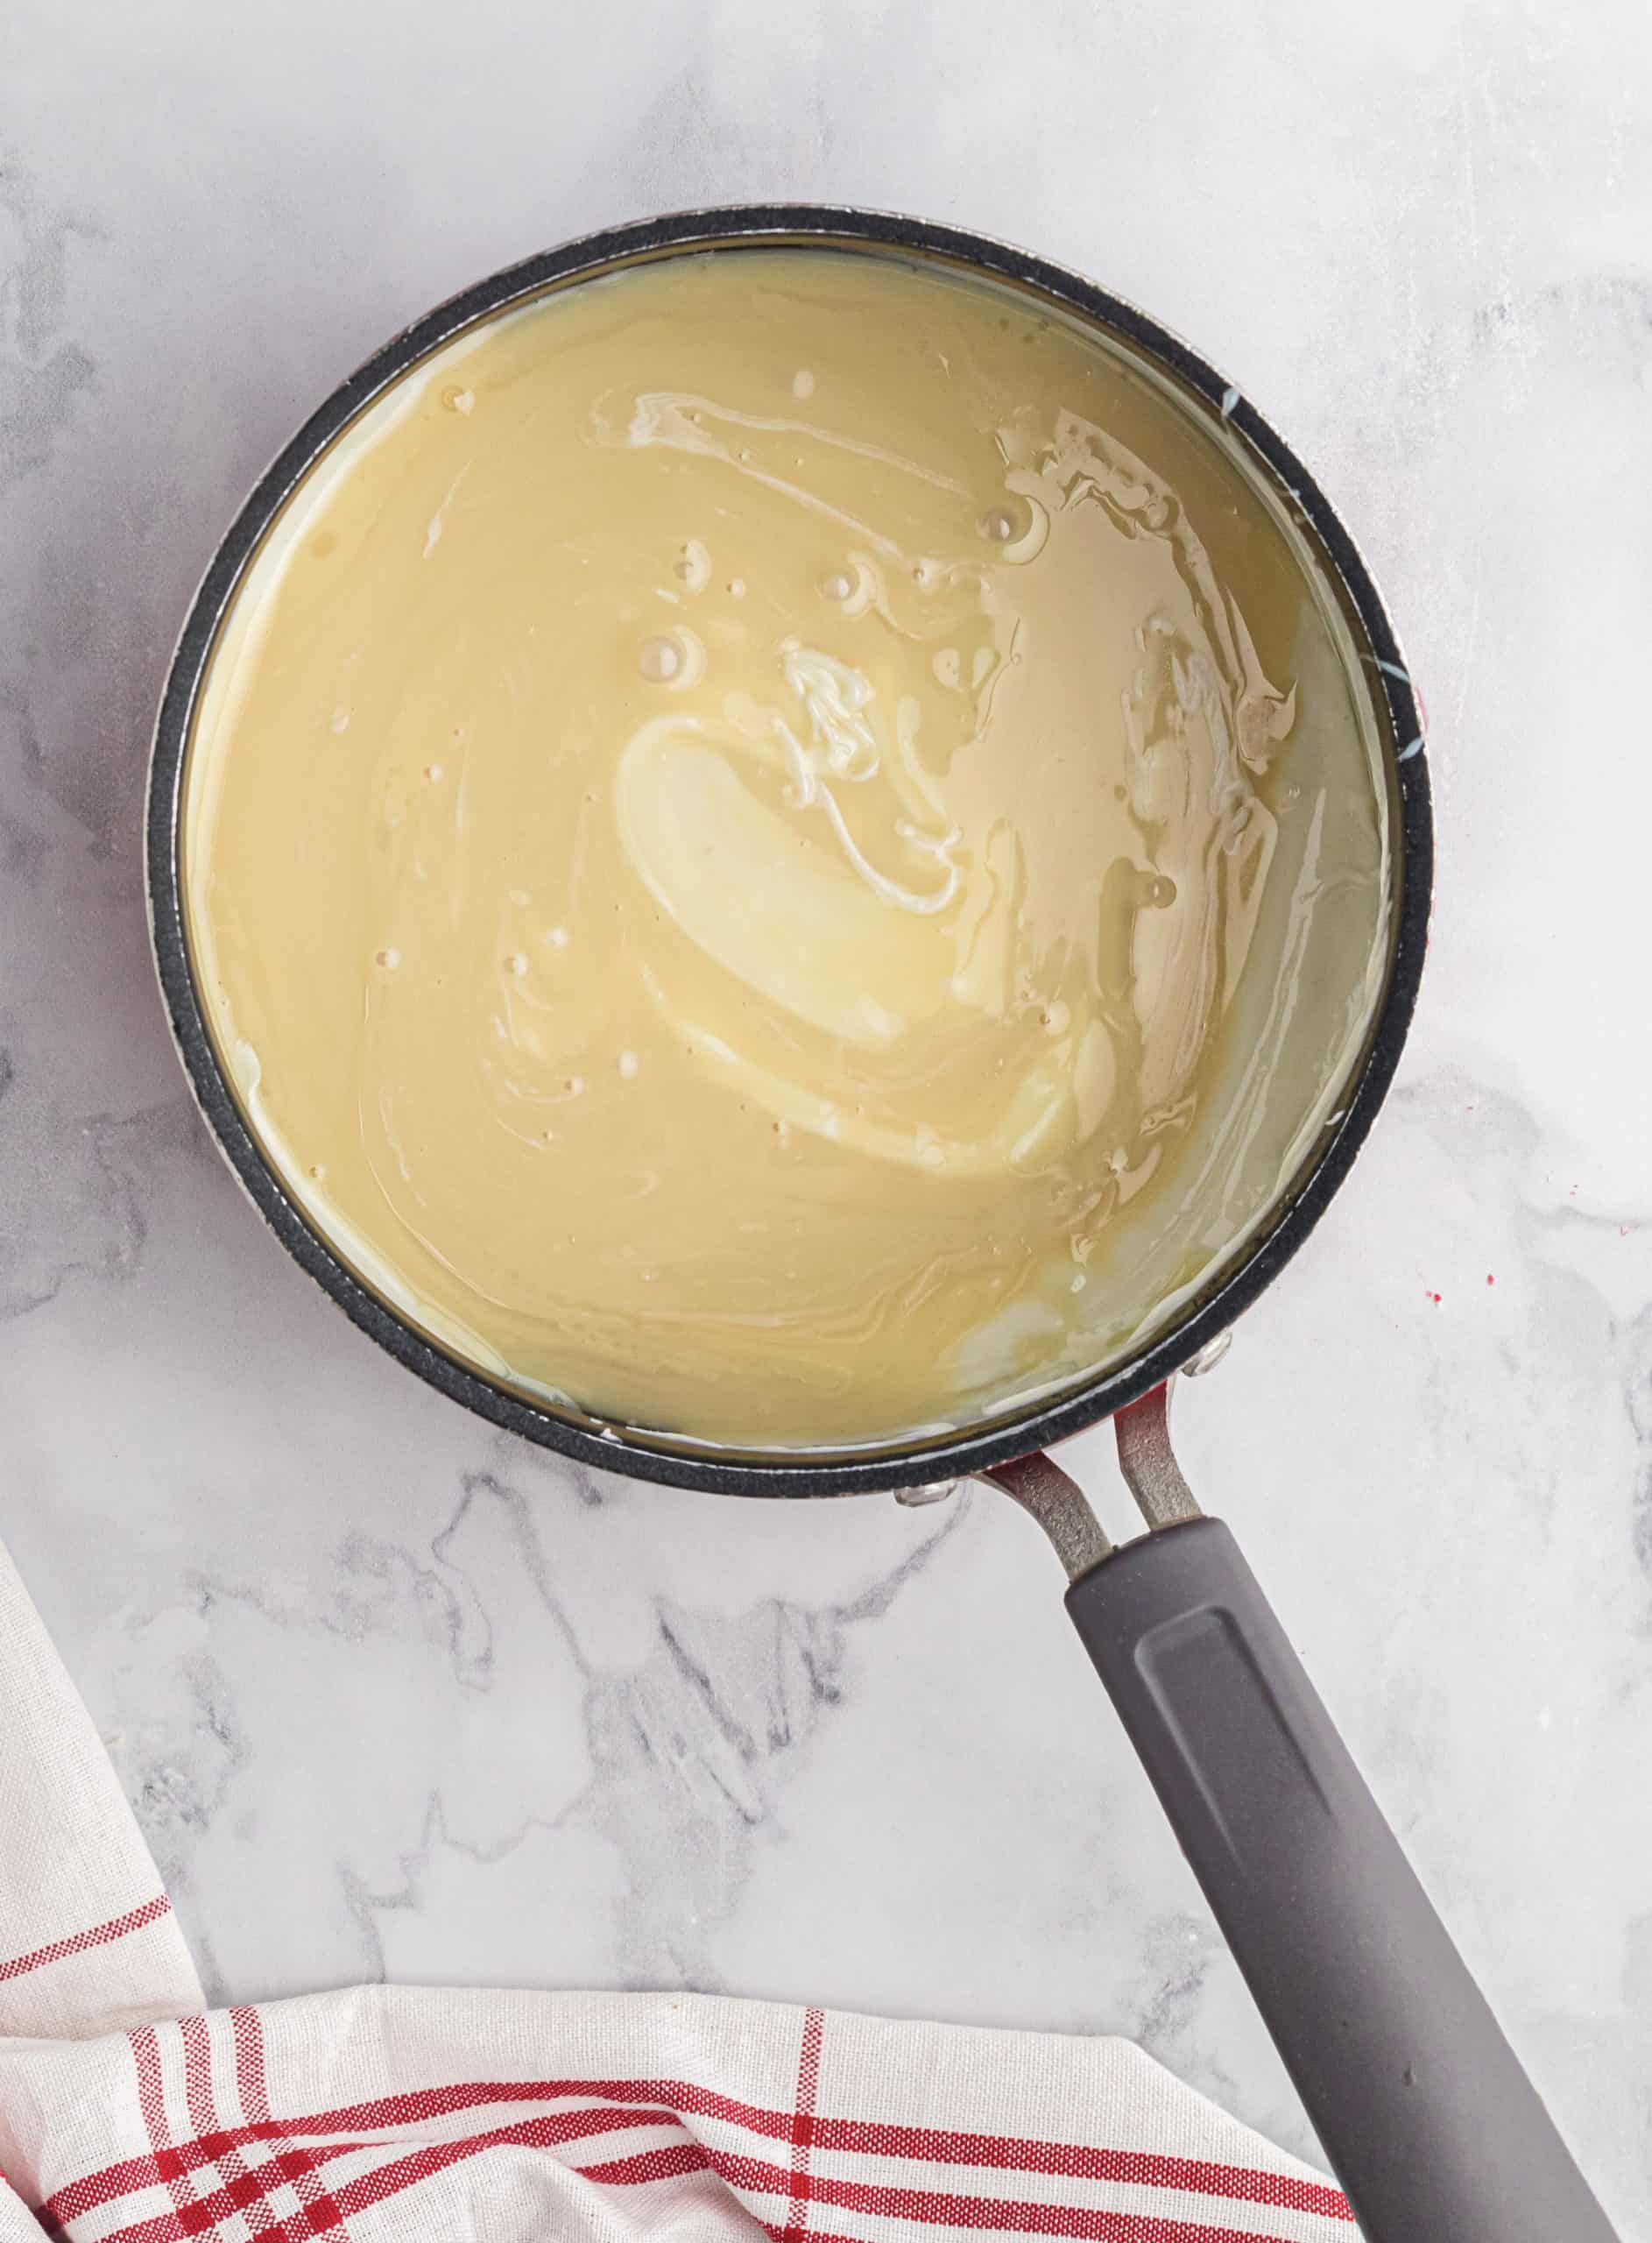 sweetened condensed milk added to melted white chocolate in a sauce pan.